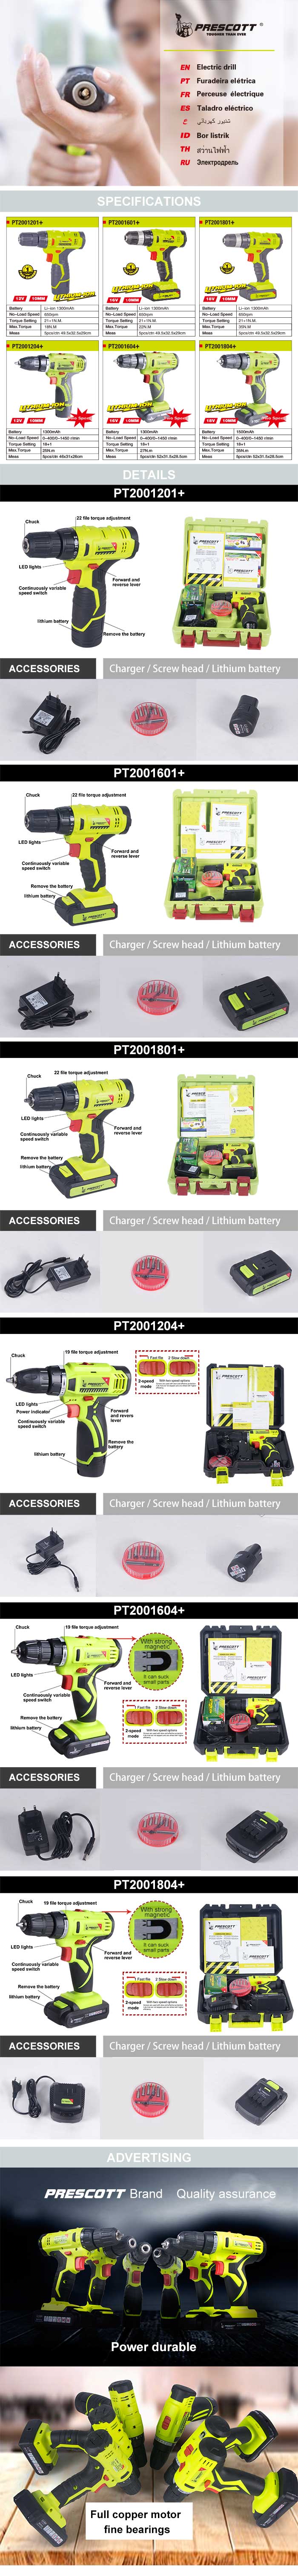 Cordless Drill PT2001204+ Specification